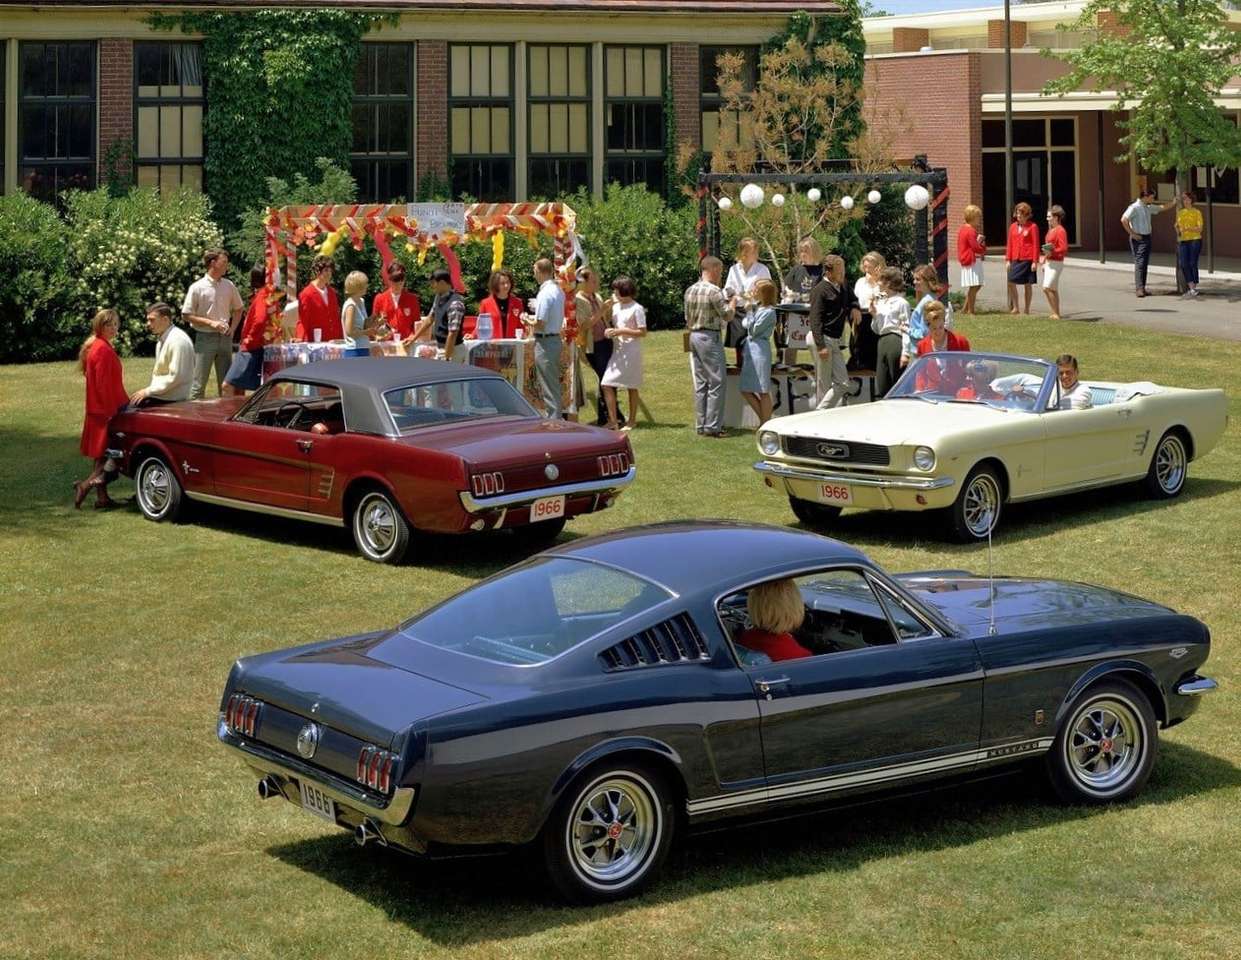 1966 Ford Mustang online puzzel